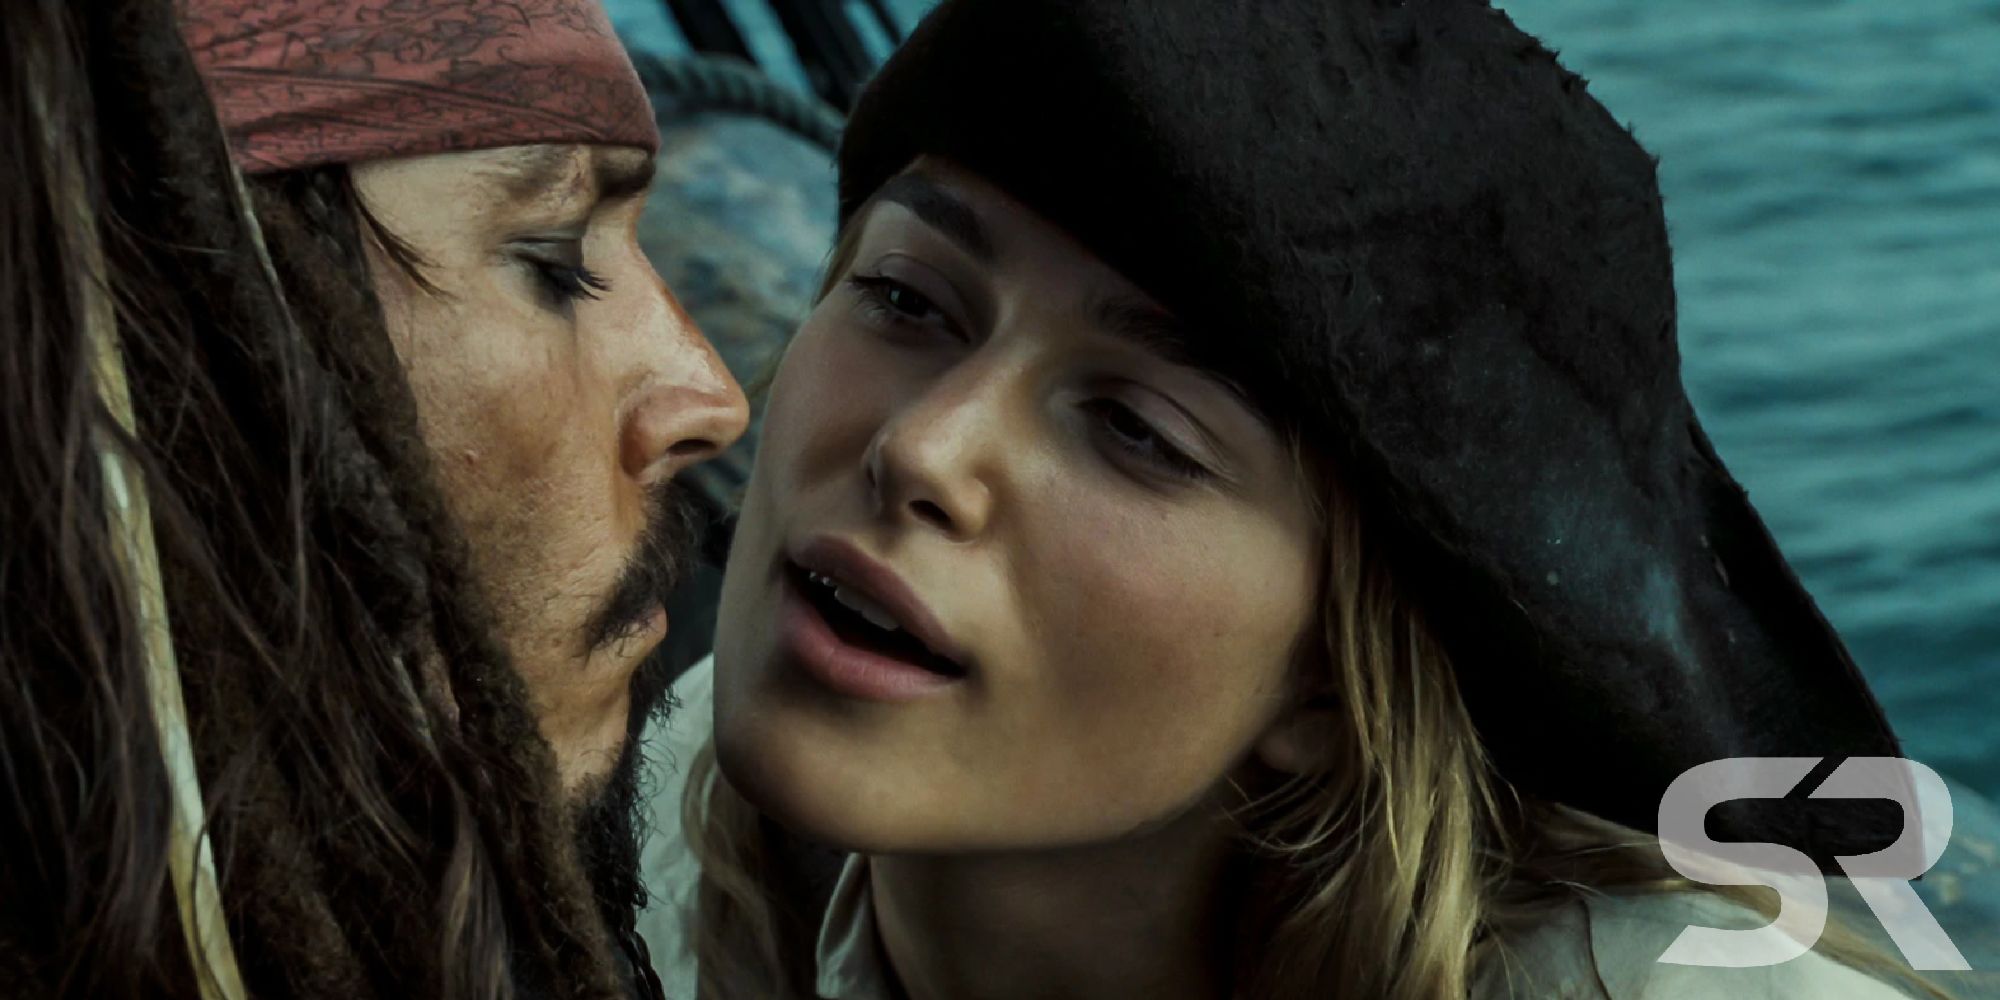 Elizabeth Swan and Jack Sparrow in Pirates of the Carribean Dead Mans Chest